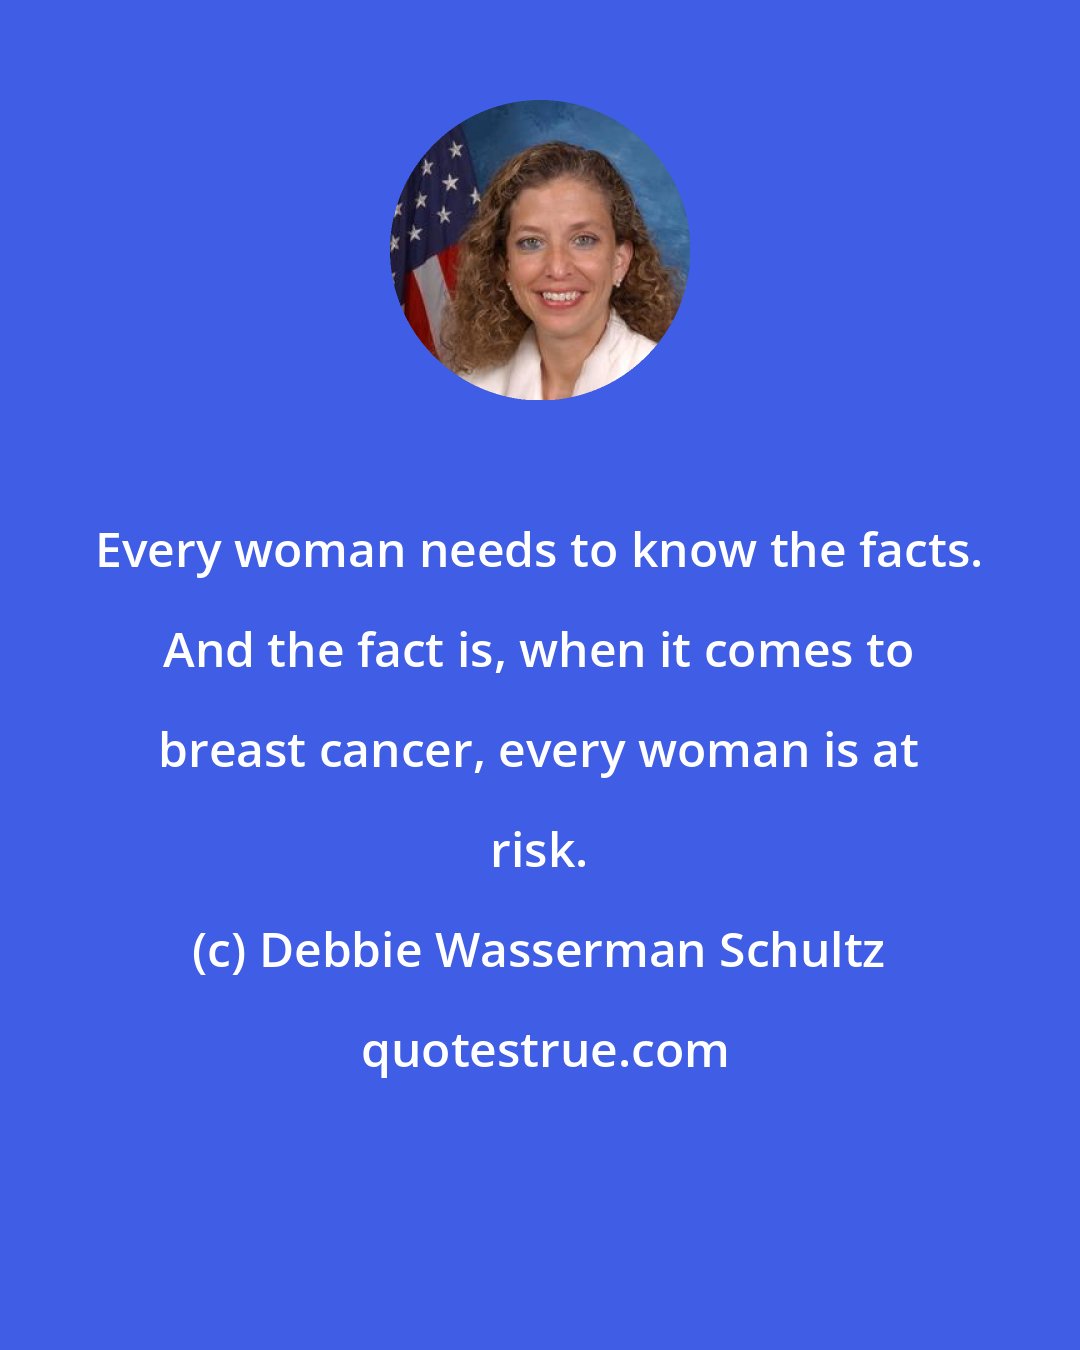 Debbie Wasserman Schultz: Every woman needs to know the facts. And the fact is, when it comes to breast cancer, every woman is at risk.